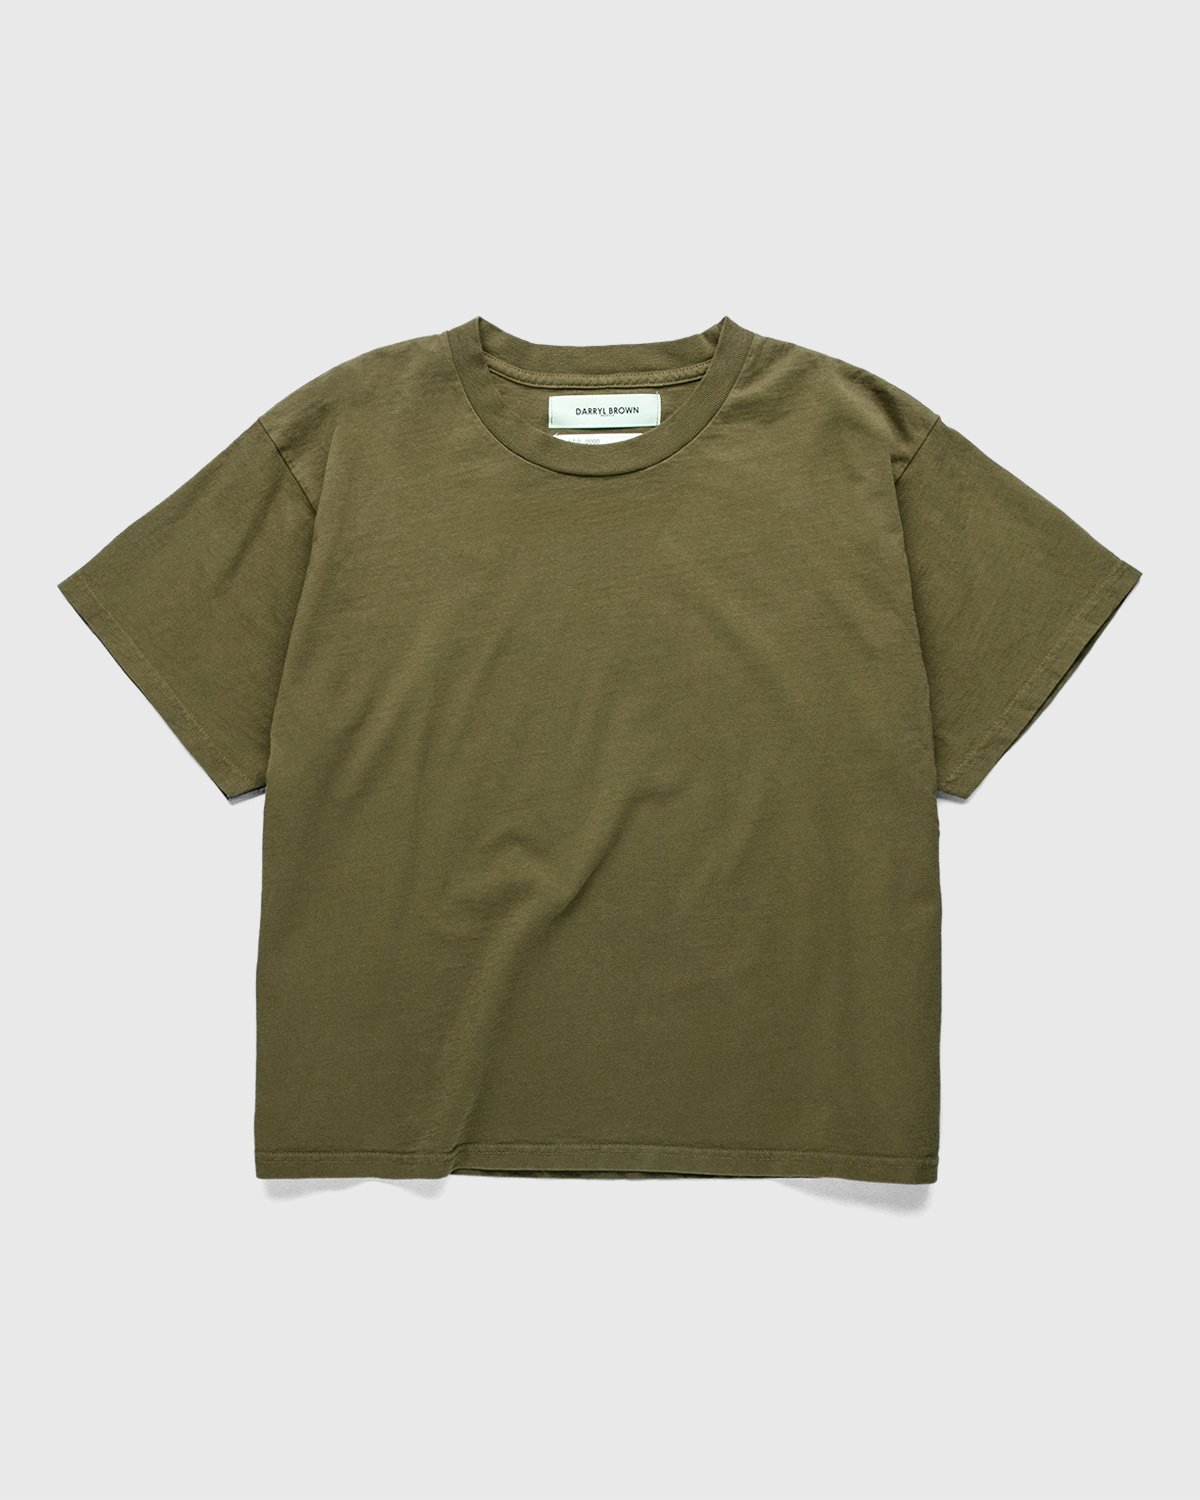 Darryl Brown - T-Shirt Military Olive - Clothing - Green - Image 1